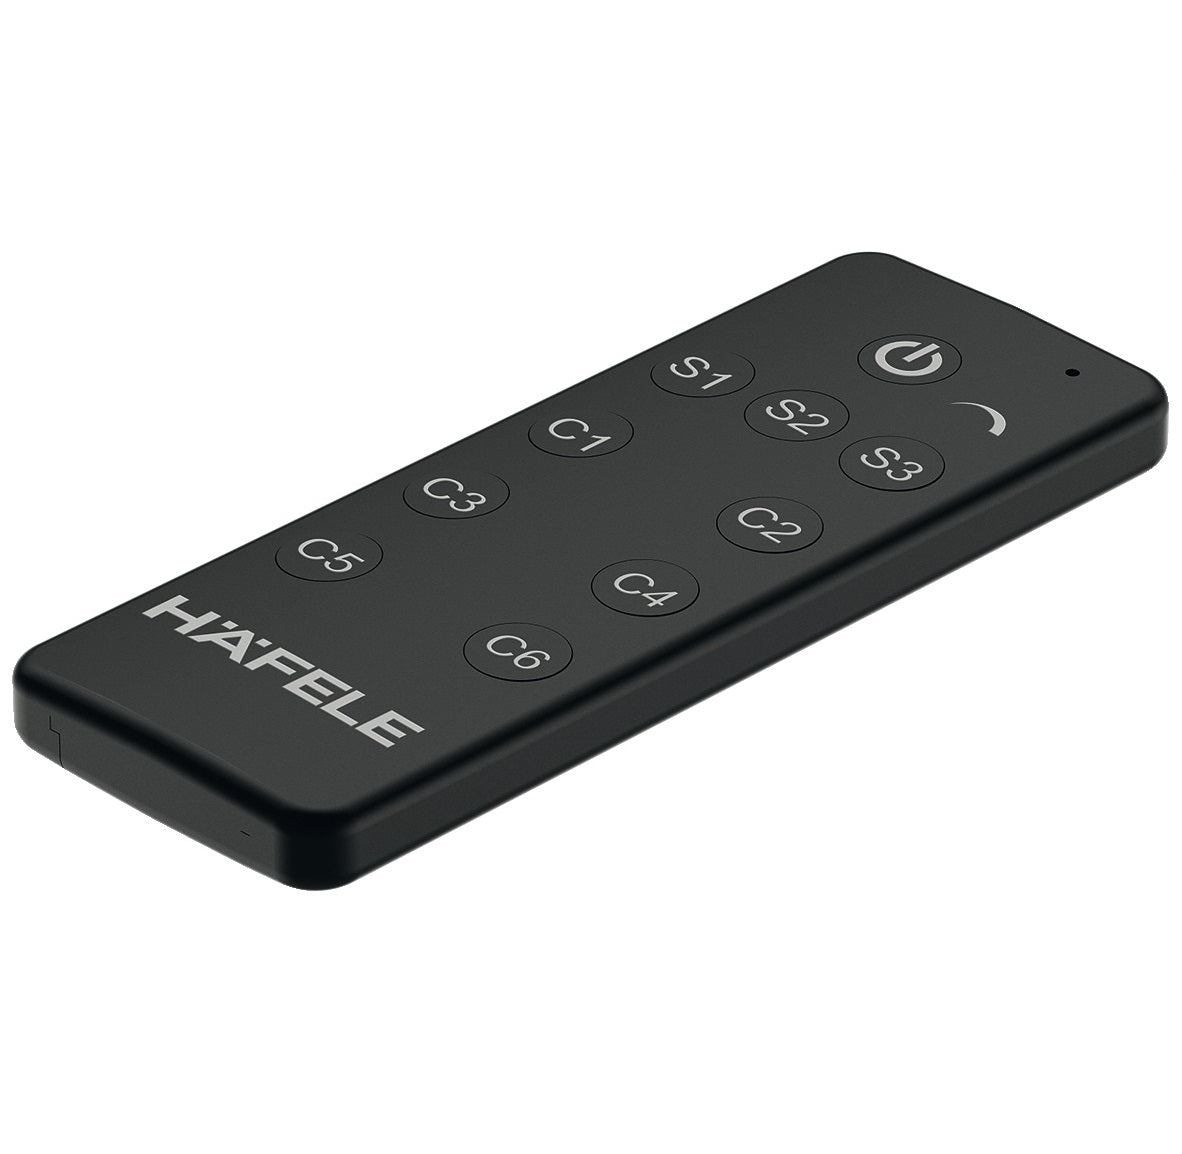 Hafele Loox Premium 6-Channel Remote Control for White LEDs